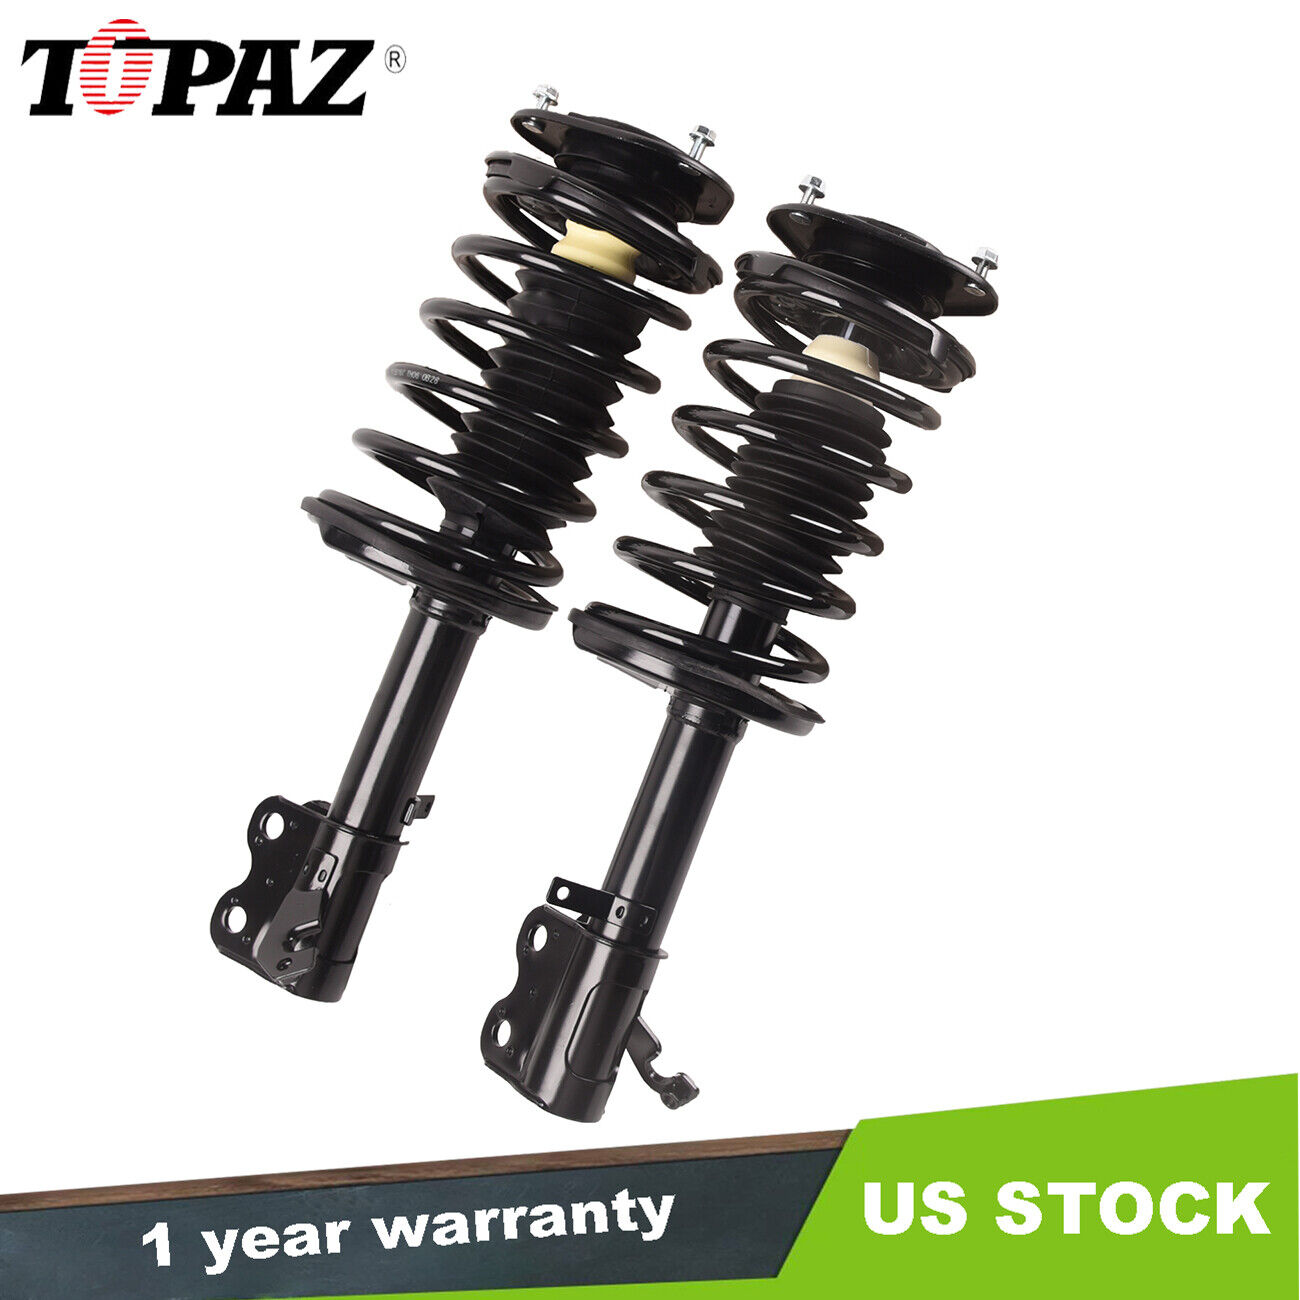 Pair Front Struts w/Coil Spring Shock Assembly For Toyota Corolla 1993-2002